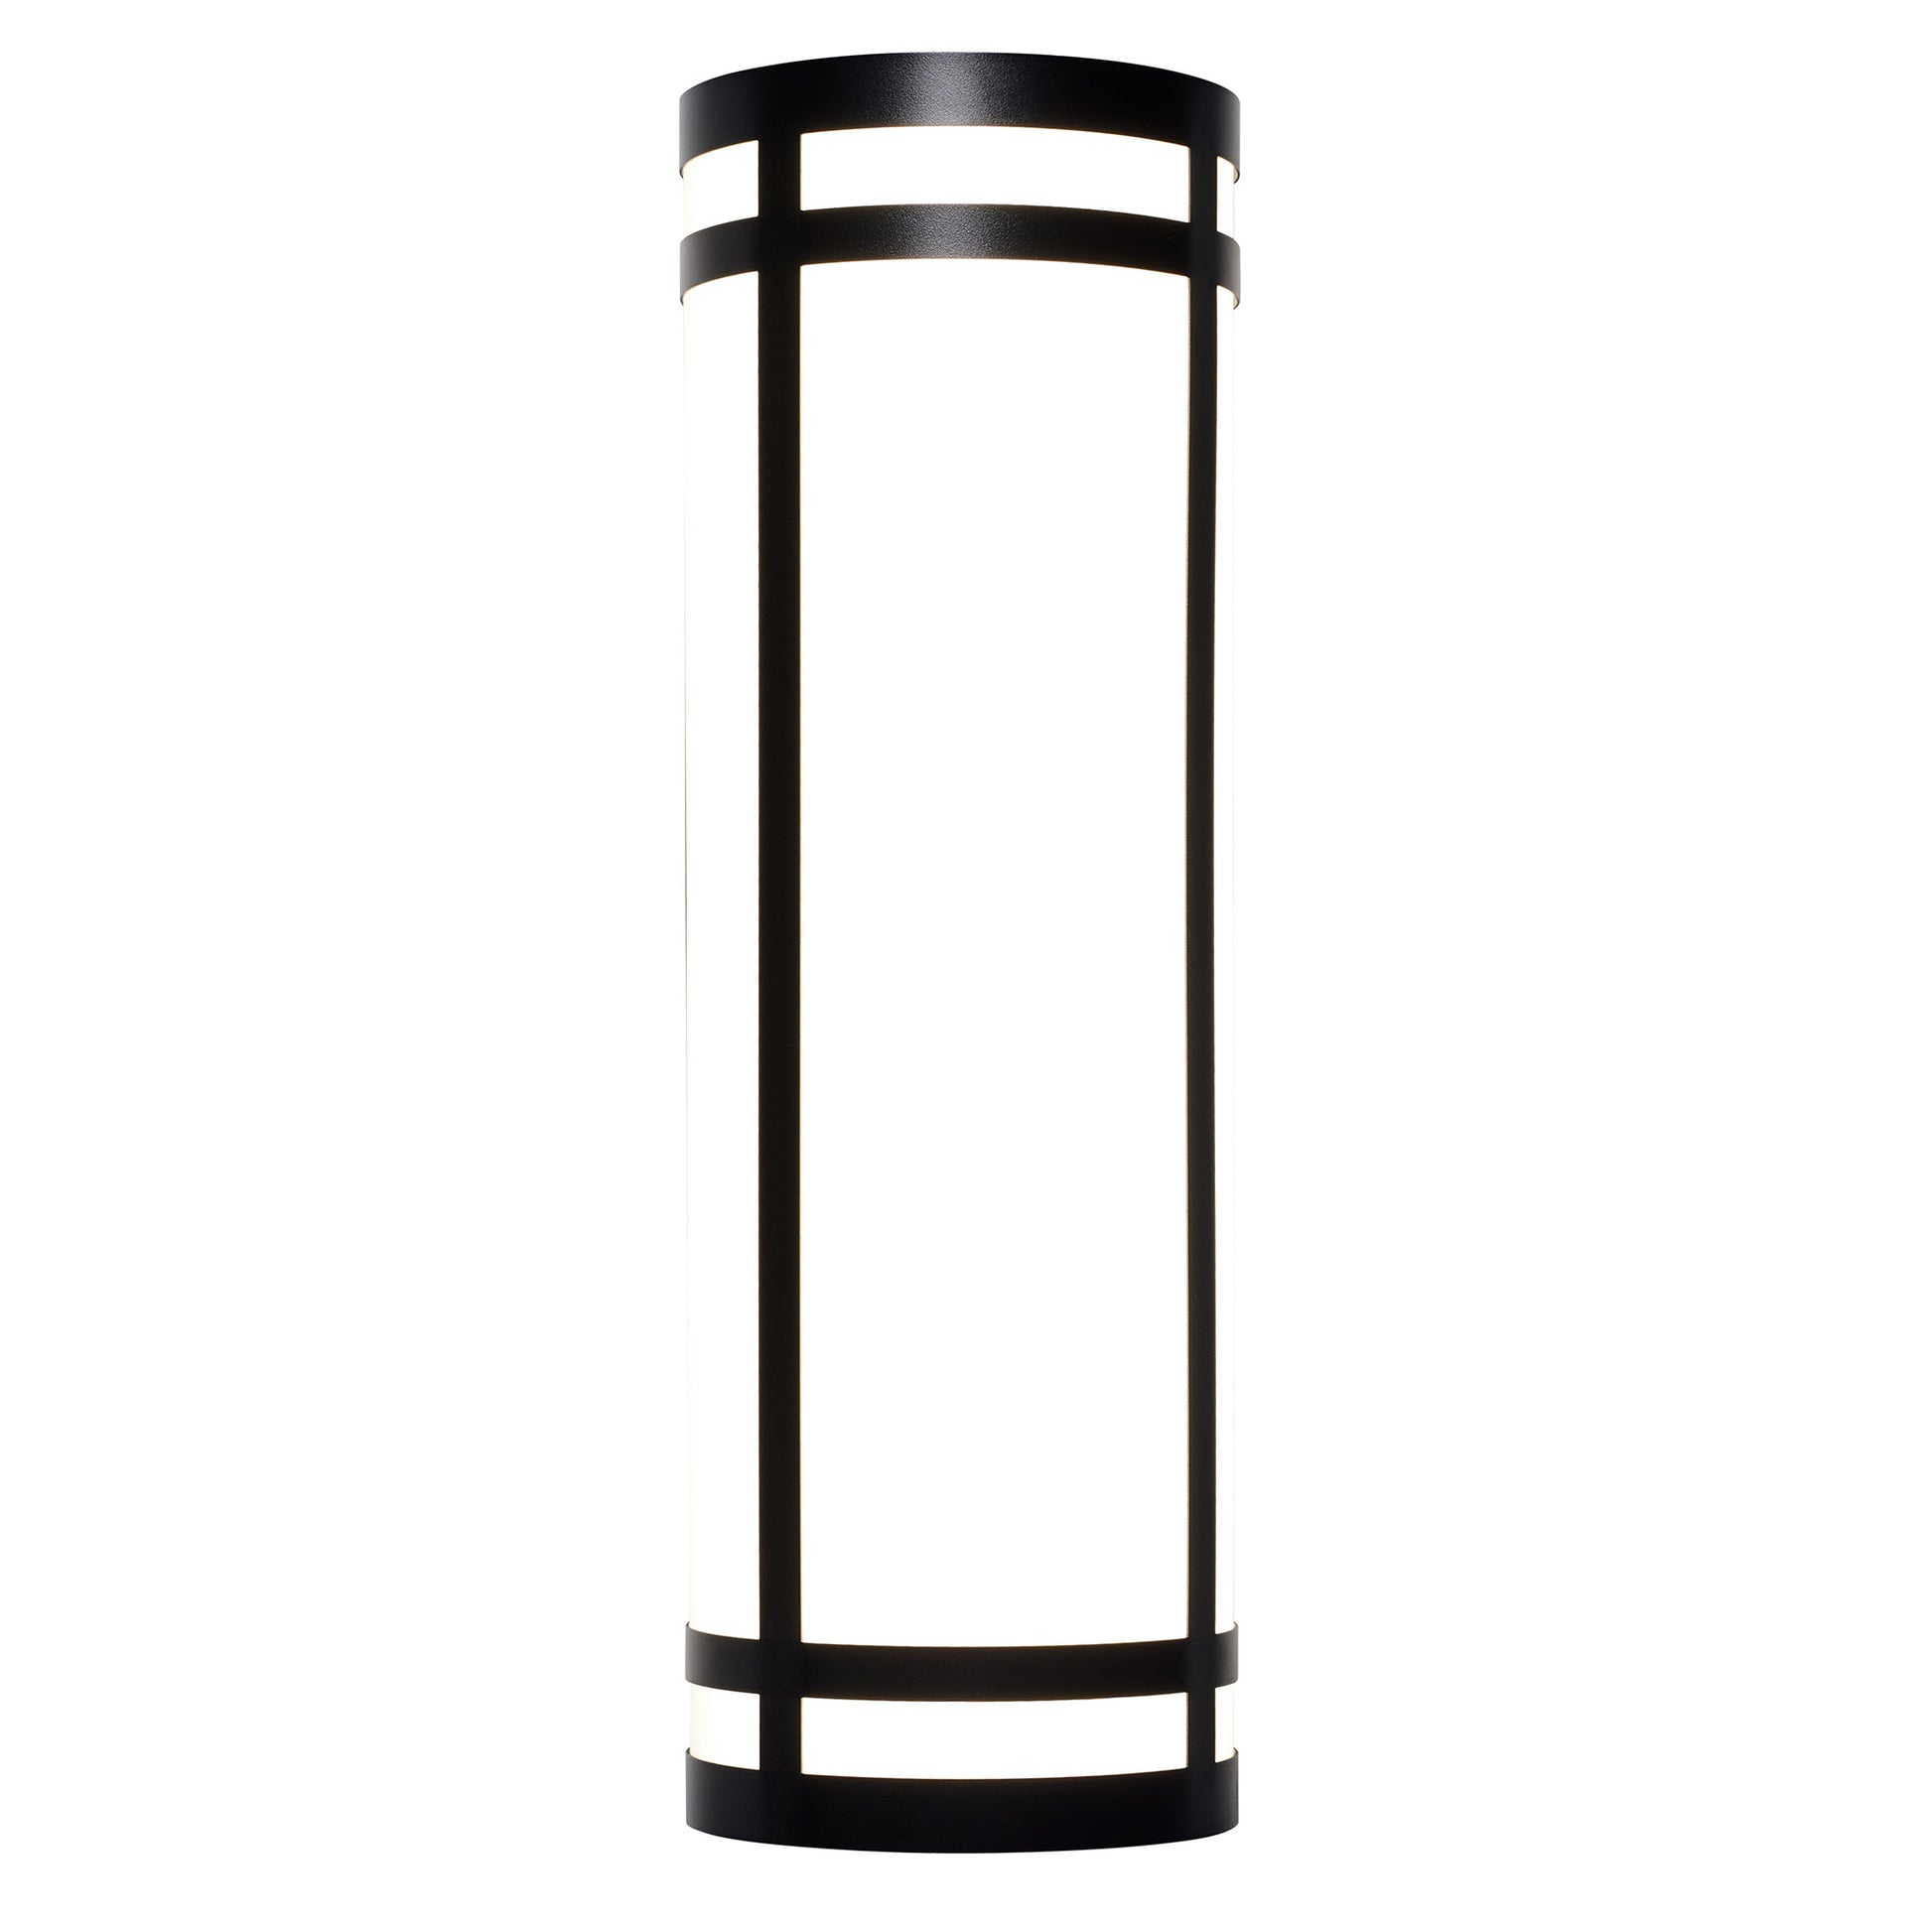 Classics Integrated LED Wall Sconce Black (Large)